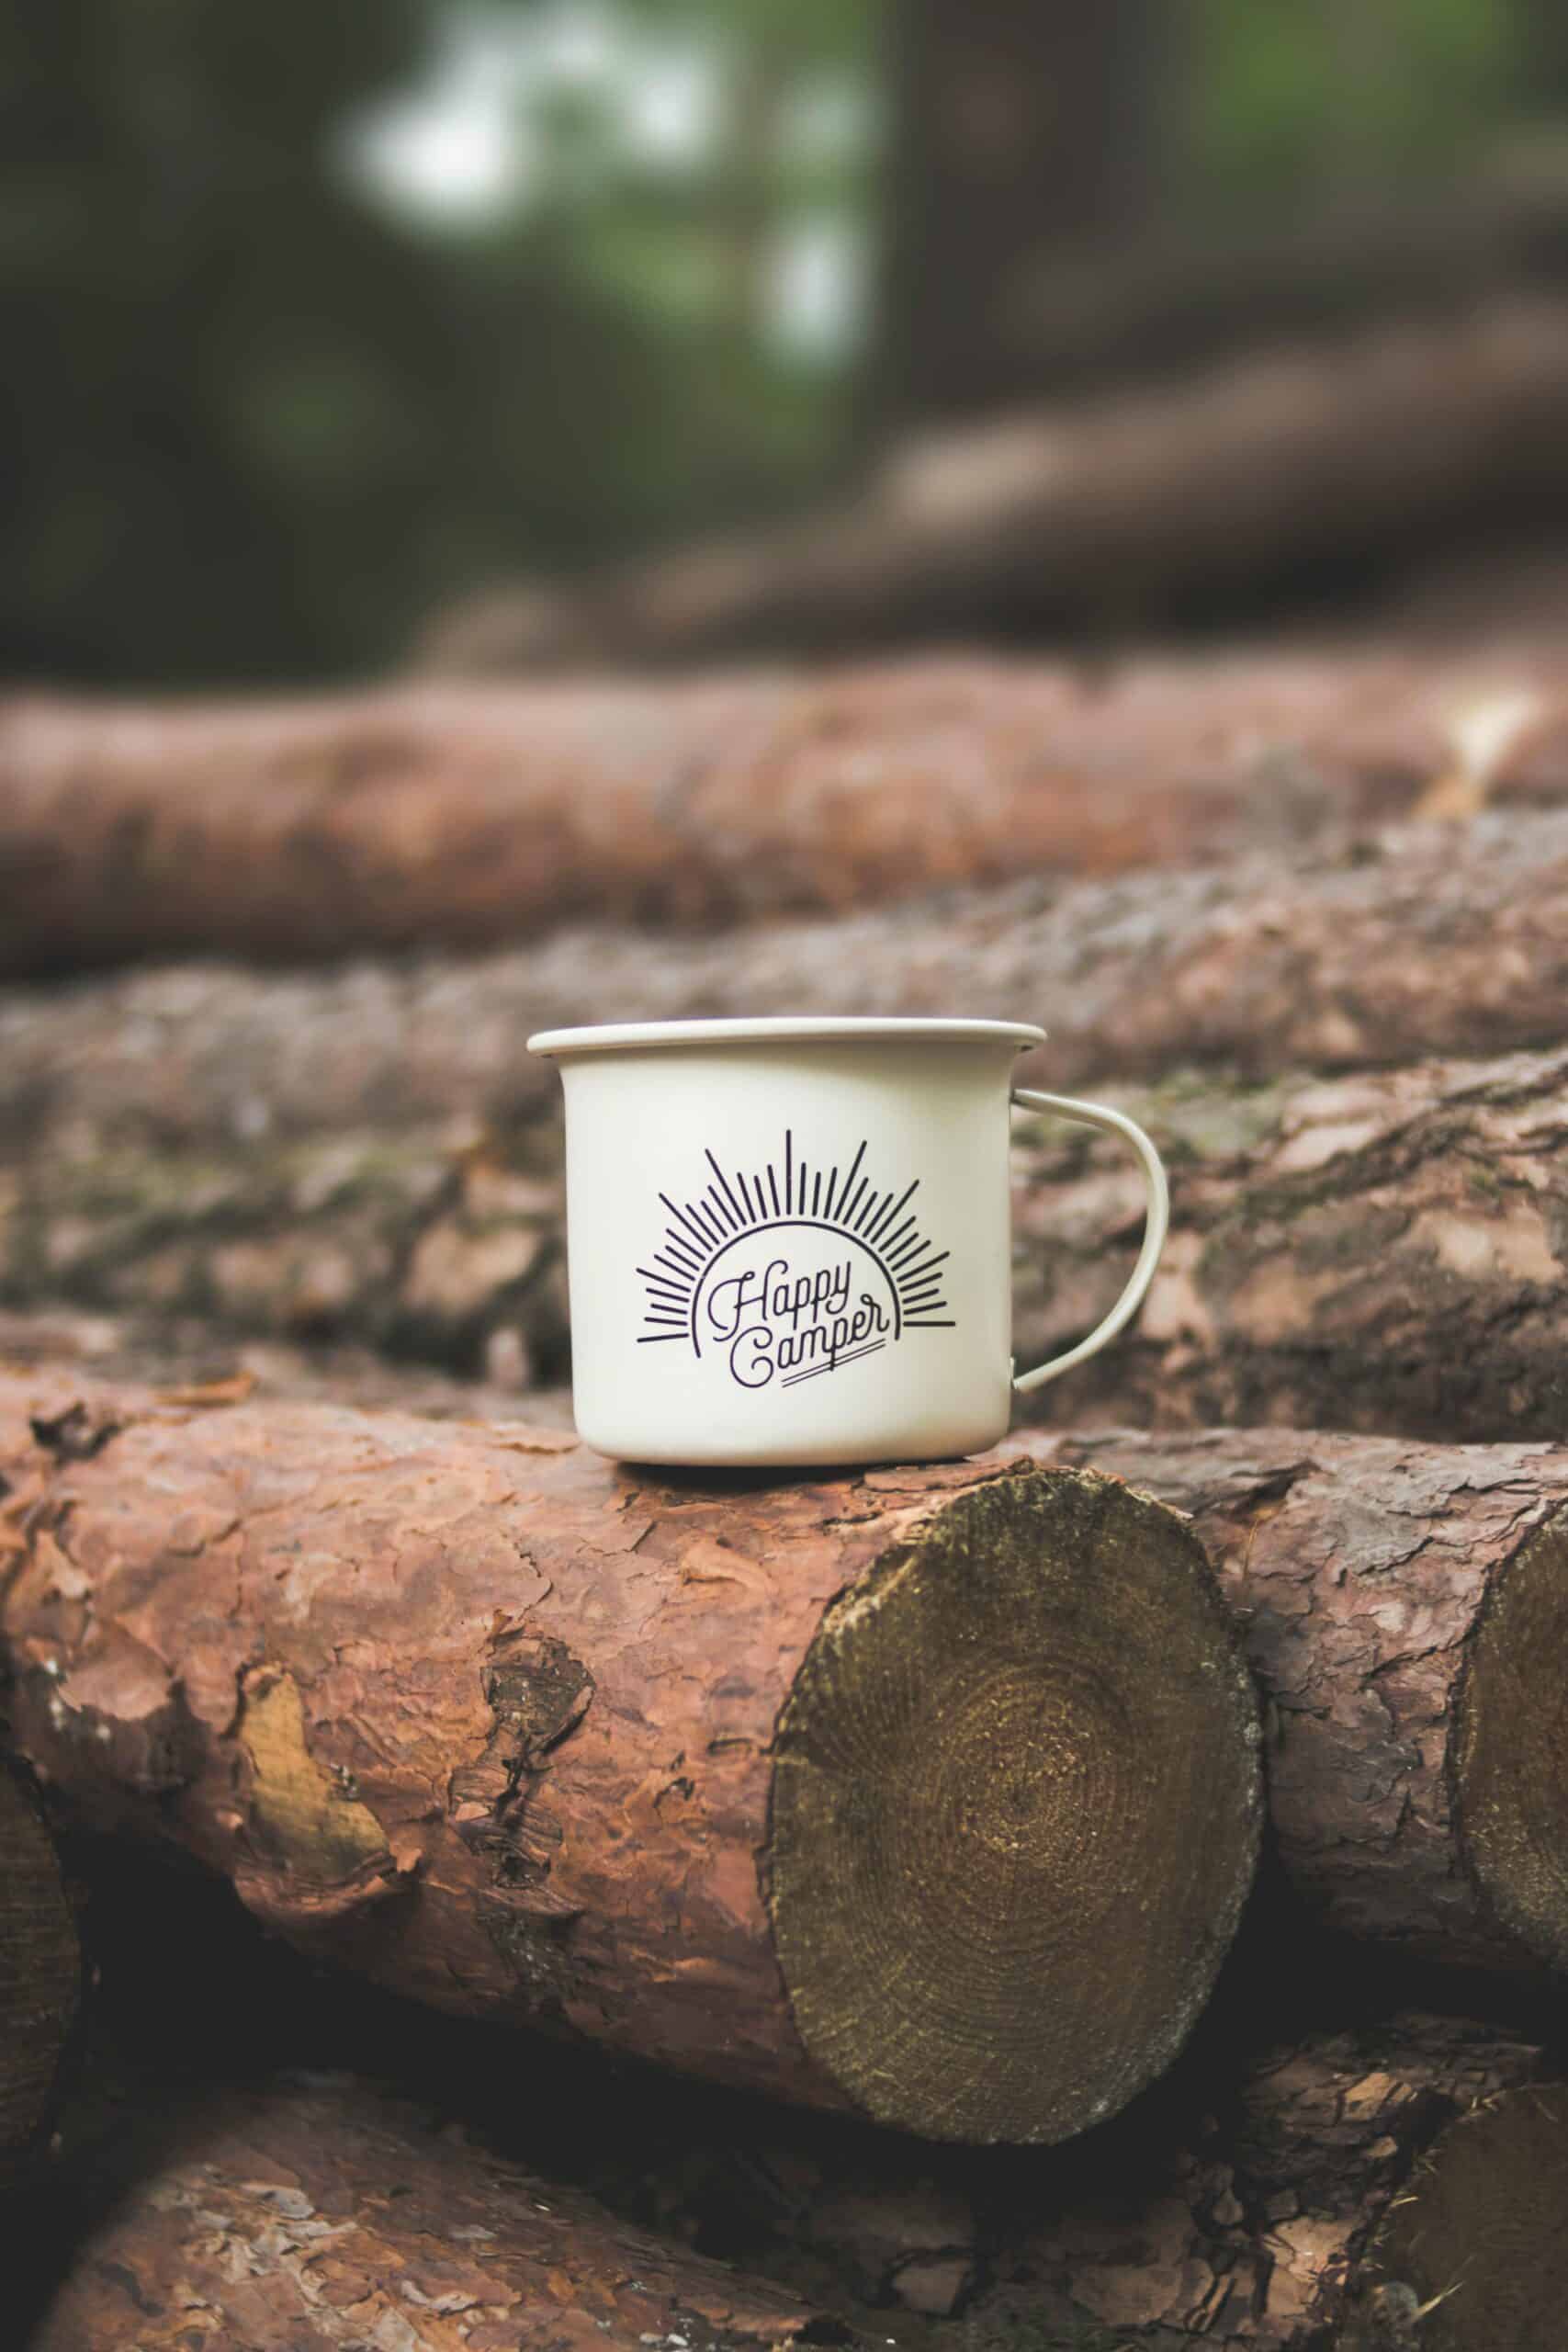 White colored happpy camper mug resting on top of some logs